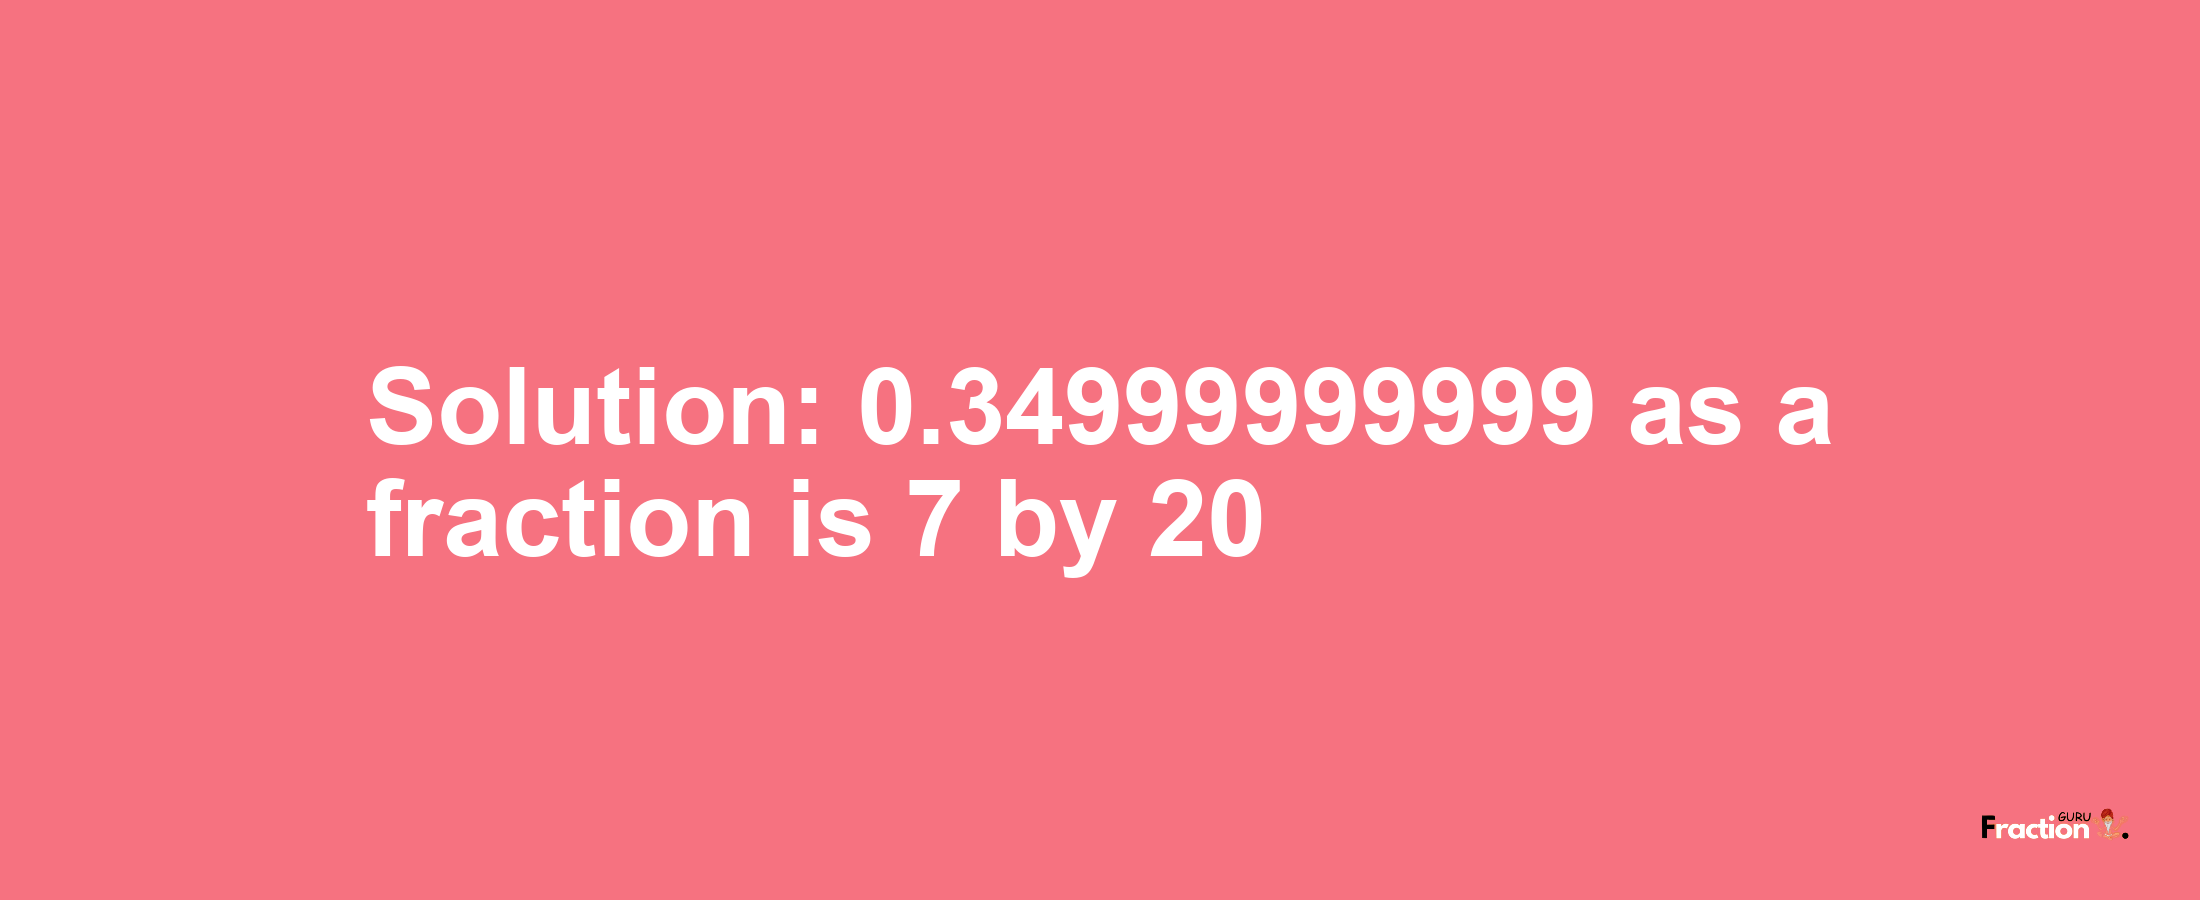 Solution:0.34999999999 as a fraction is 7/20